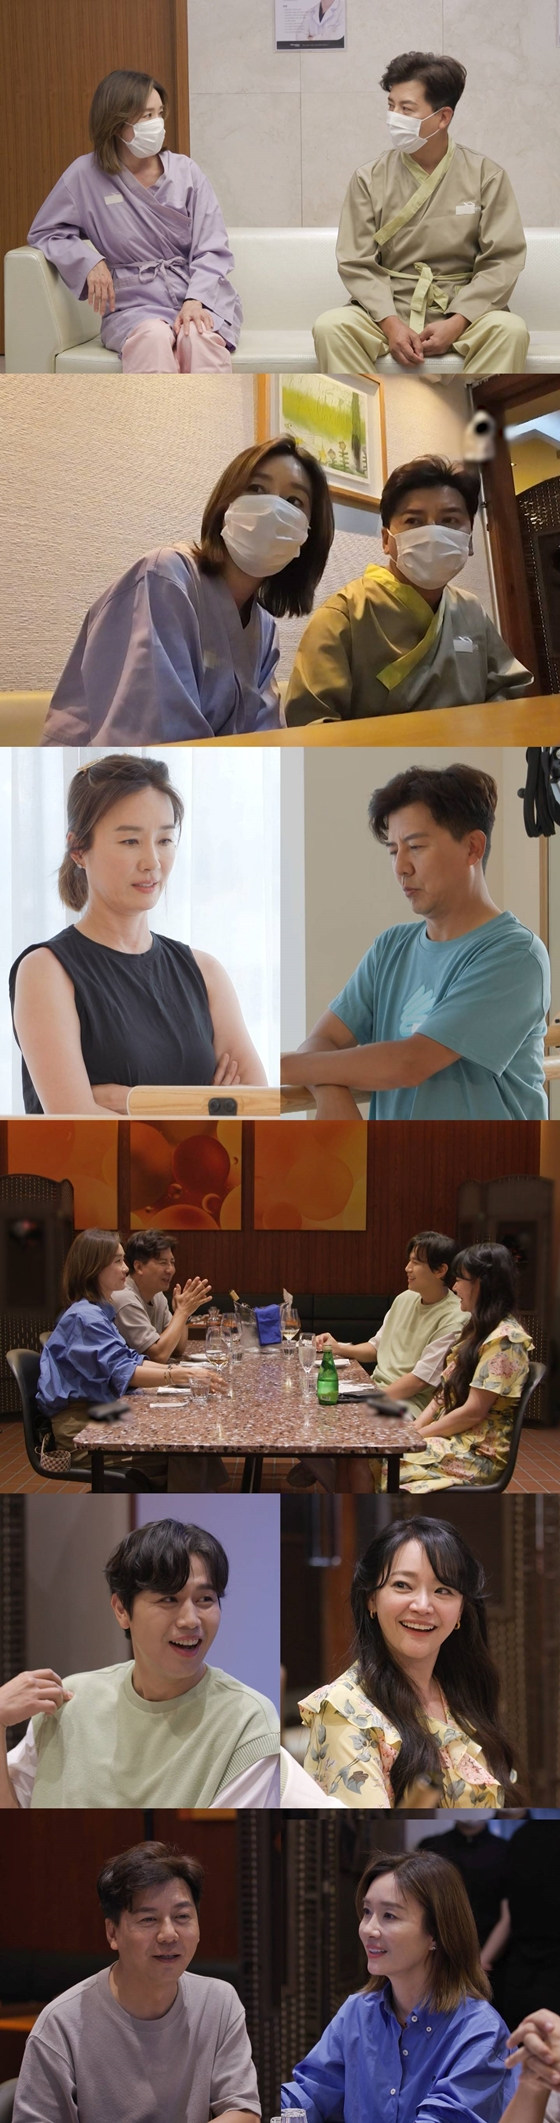 SBS Same Bed, Different Dreams 2 Season 2 - You Are My Destiny (hereinafter Same Bed, Different Dreams 2), which is broadcasted on the afternoon of October 10, depicts Son Ji Chang and Oh Yeon-soo Couple in Health screenings.Recently, Son Ji Chang, Oh Yeon-soo Couple visited the hospital for health screenings.Oh Yeon-soo, who is regularly inspected for regular health care, was worried when Son Ji Chang said, Its been three or four years since I was examined and I do not know it is medicine.Sure enough, Son Ji Chang, who finished the test, was given a shocking diagnosis, and Oh Yeon-soos depth deepened.Even Son Ji Chang, who was blithe at the doctors remark that he may have to undergo general anesthesia and surgery, was perplexed, wondering what had happened to Son Ji Chang.Oh Yeon-soo, a health evangelist, took special measures for Son Ji Changs health care. Oh Yeon-soo decided to learn a lot of exercise these days.Son Ji Chang, who was in front of a questionable device for the first time in his life, showed a sense of tension when he saw Oh Yeon-soos skillful demonstration and said, Is not it a torture device?Oh Yeon-soo evoked admiration with the graceful flexibility of a swan, while Son Ji Chang, the basketball star figure, evoked the studios laughter with an inexorable stiffness: Oh Yeon-soo said, Not like that?And It is too much of a turtle neck. He continued his harsh training, and Son Ji Chang eventually said that the pupil was released and the song was released.On the other hand, Son Ji Chang and Oh Yeon-soo Couple met Kim So-hyun and Son Jun-ho Couple,Kim So-hyun and Son Jun-ho Couple focused their attention on their son Juan, who turned 12 years old and refused his father little by little before puberty.So Son Ji Chang and Oh Yeon-soo Couple gave Kim So-hyun a chance to share their true experiences with their two sons.In addition, Son Ji Chang and Oh Yeon-soo Couple confessed to the unstable family history and told Couple that the family had to be special.It is said that the studio MCs who watched in the heart of Couple who spoke candidly blushed their eyes.